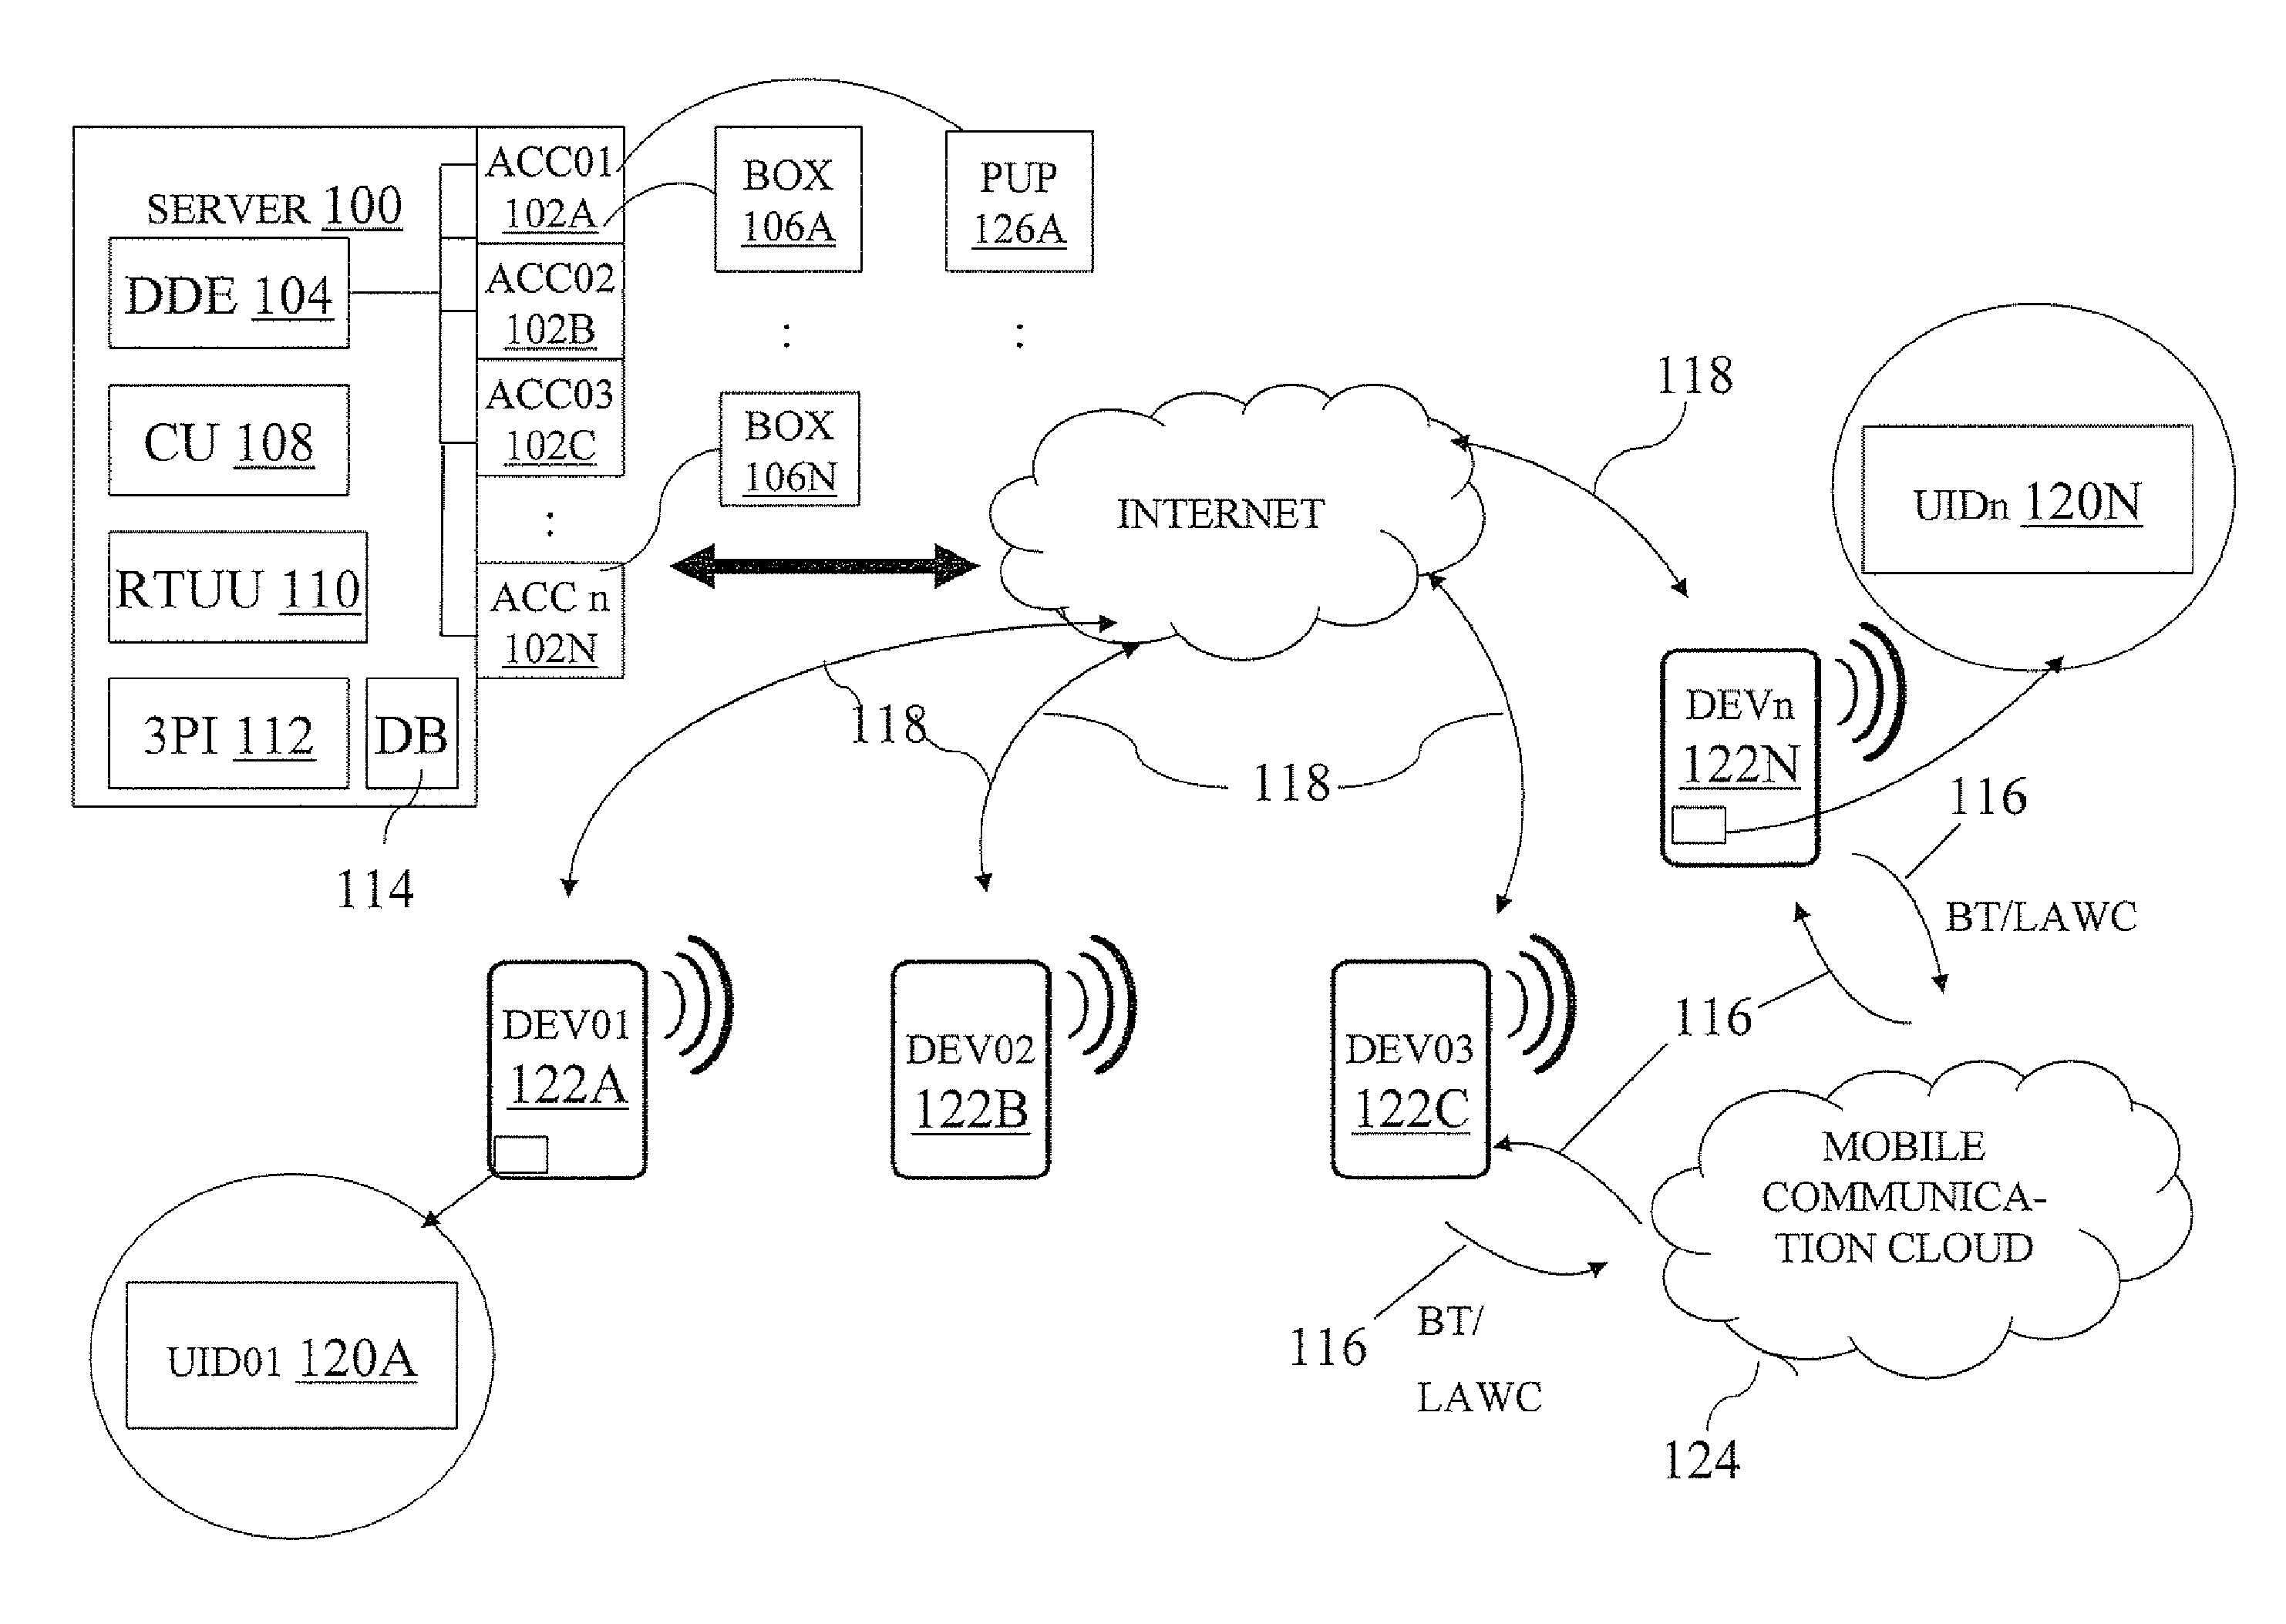 Location-aware Mobile Connectivity and Information Exchange System